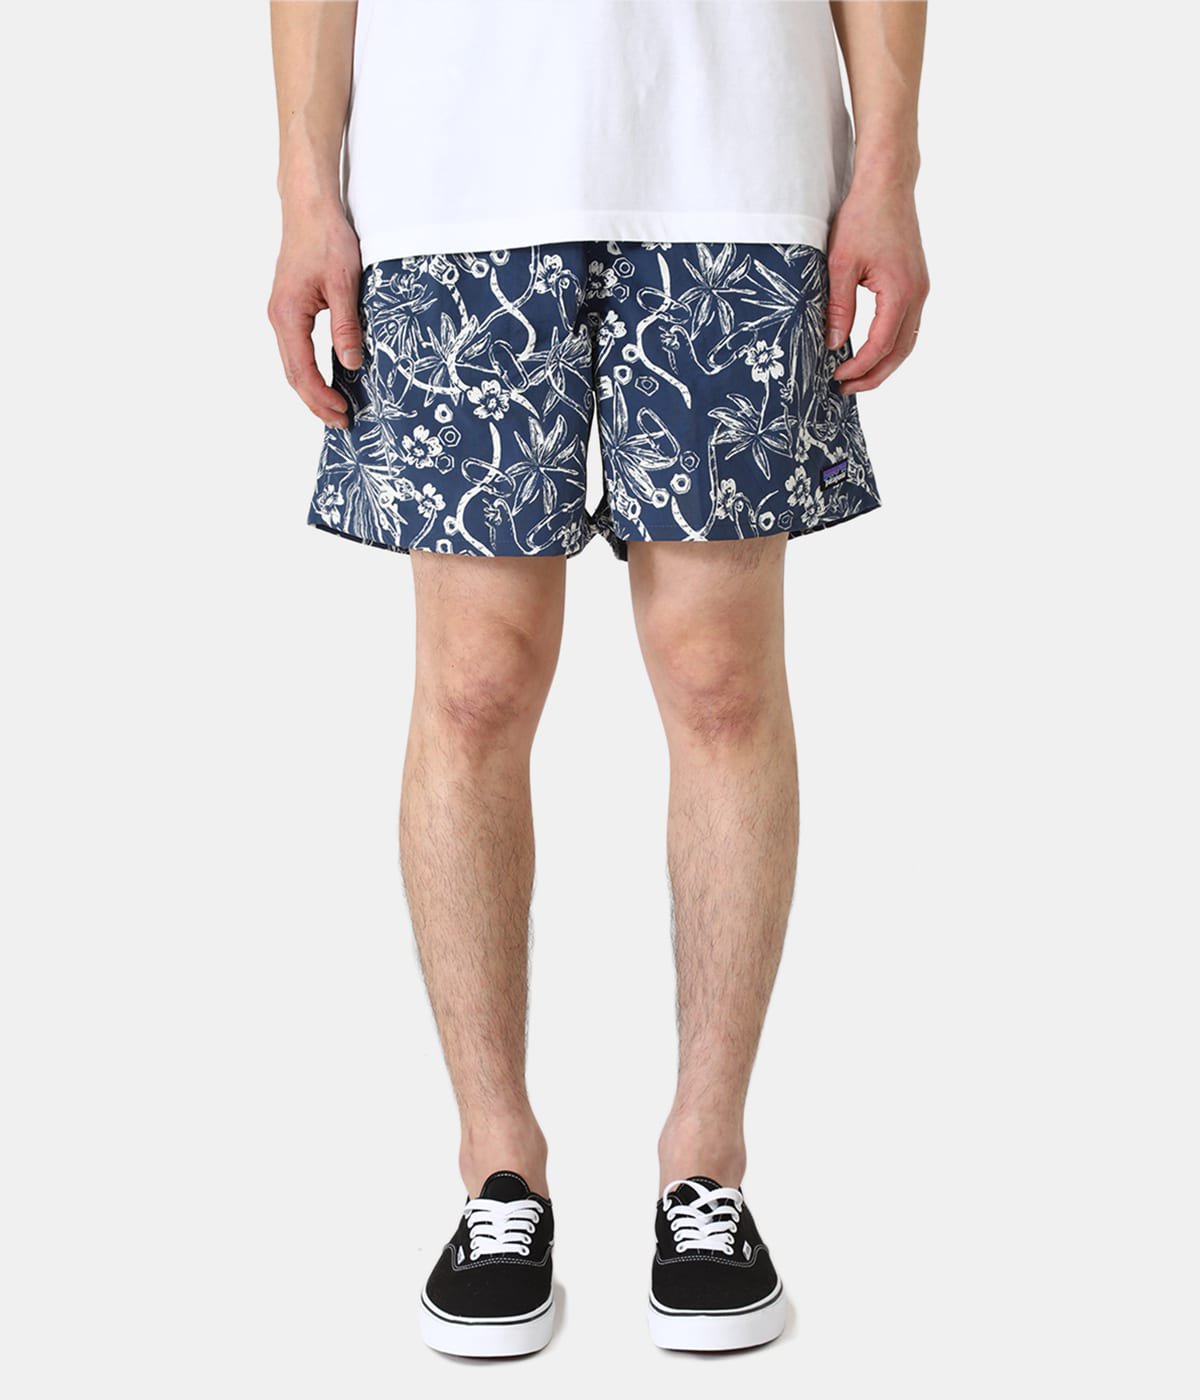 M's Baggies Shorts - 5 in -HQSR-